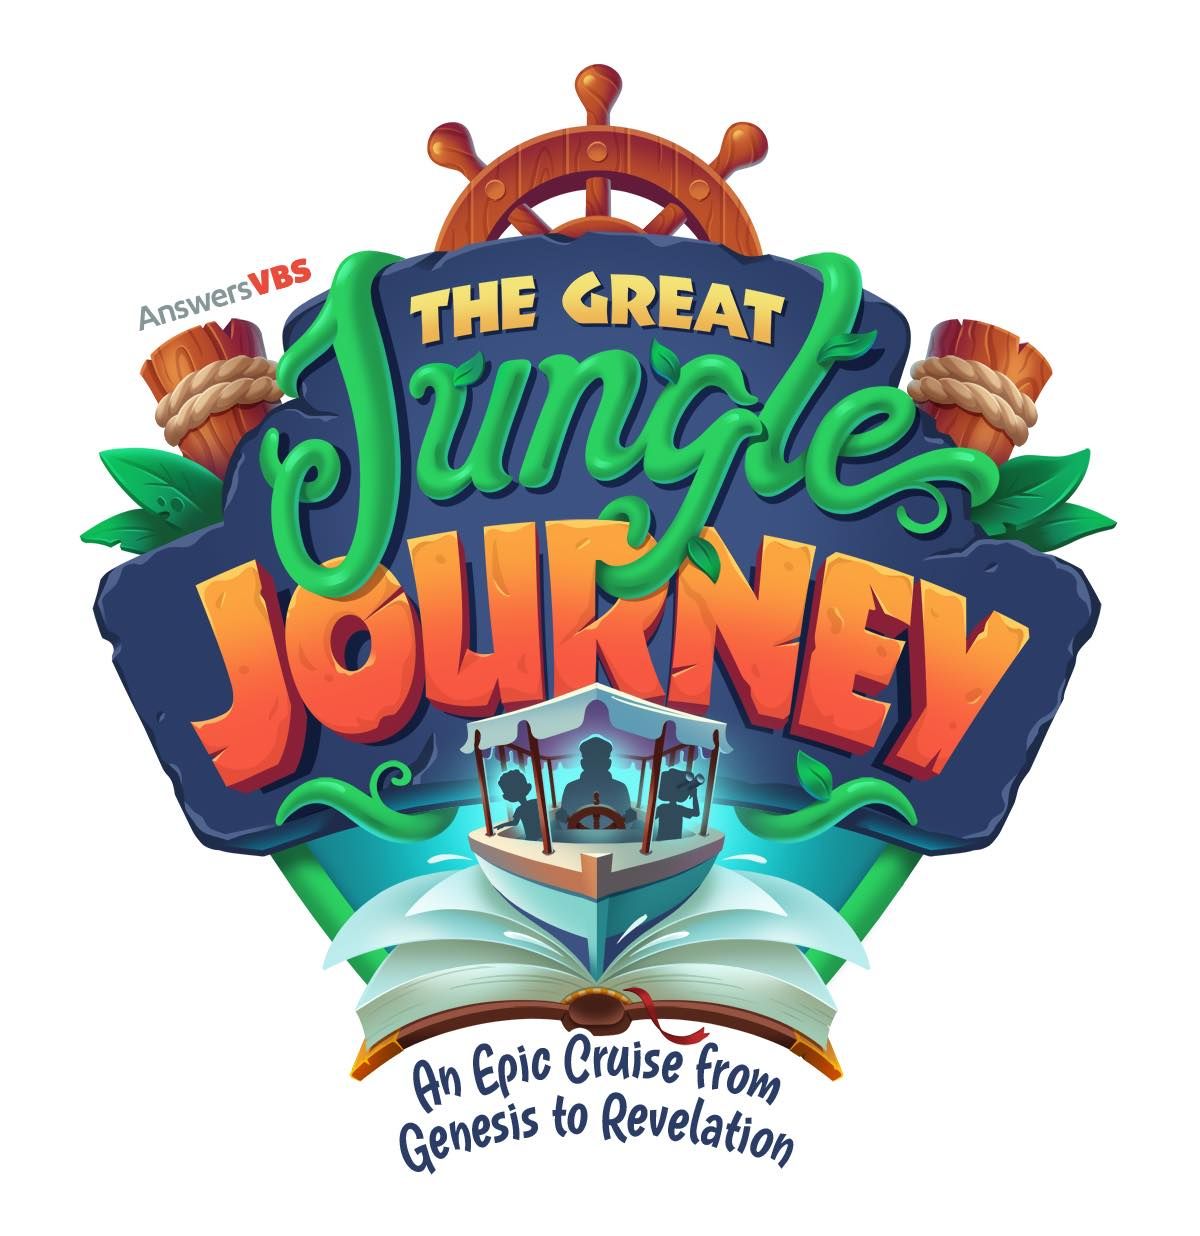 FREE Vacation Bible School for Kids Ages 4-12